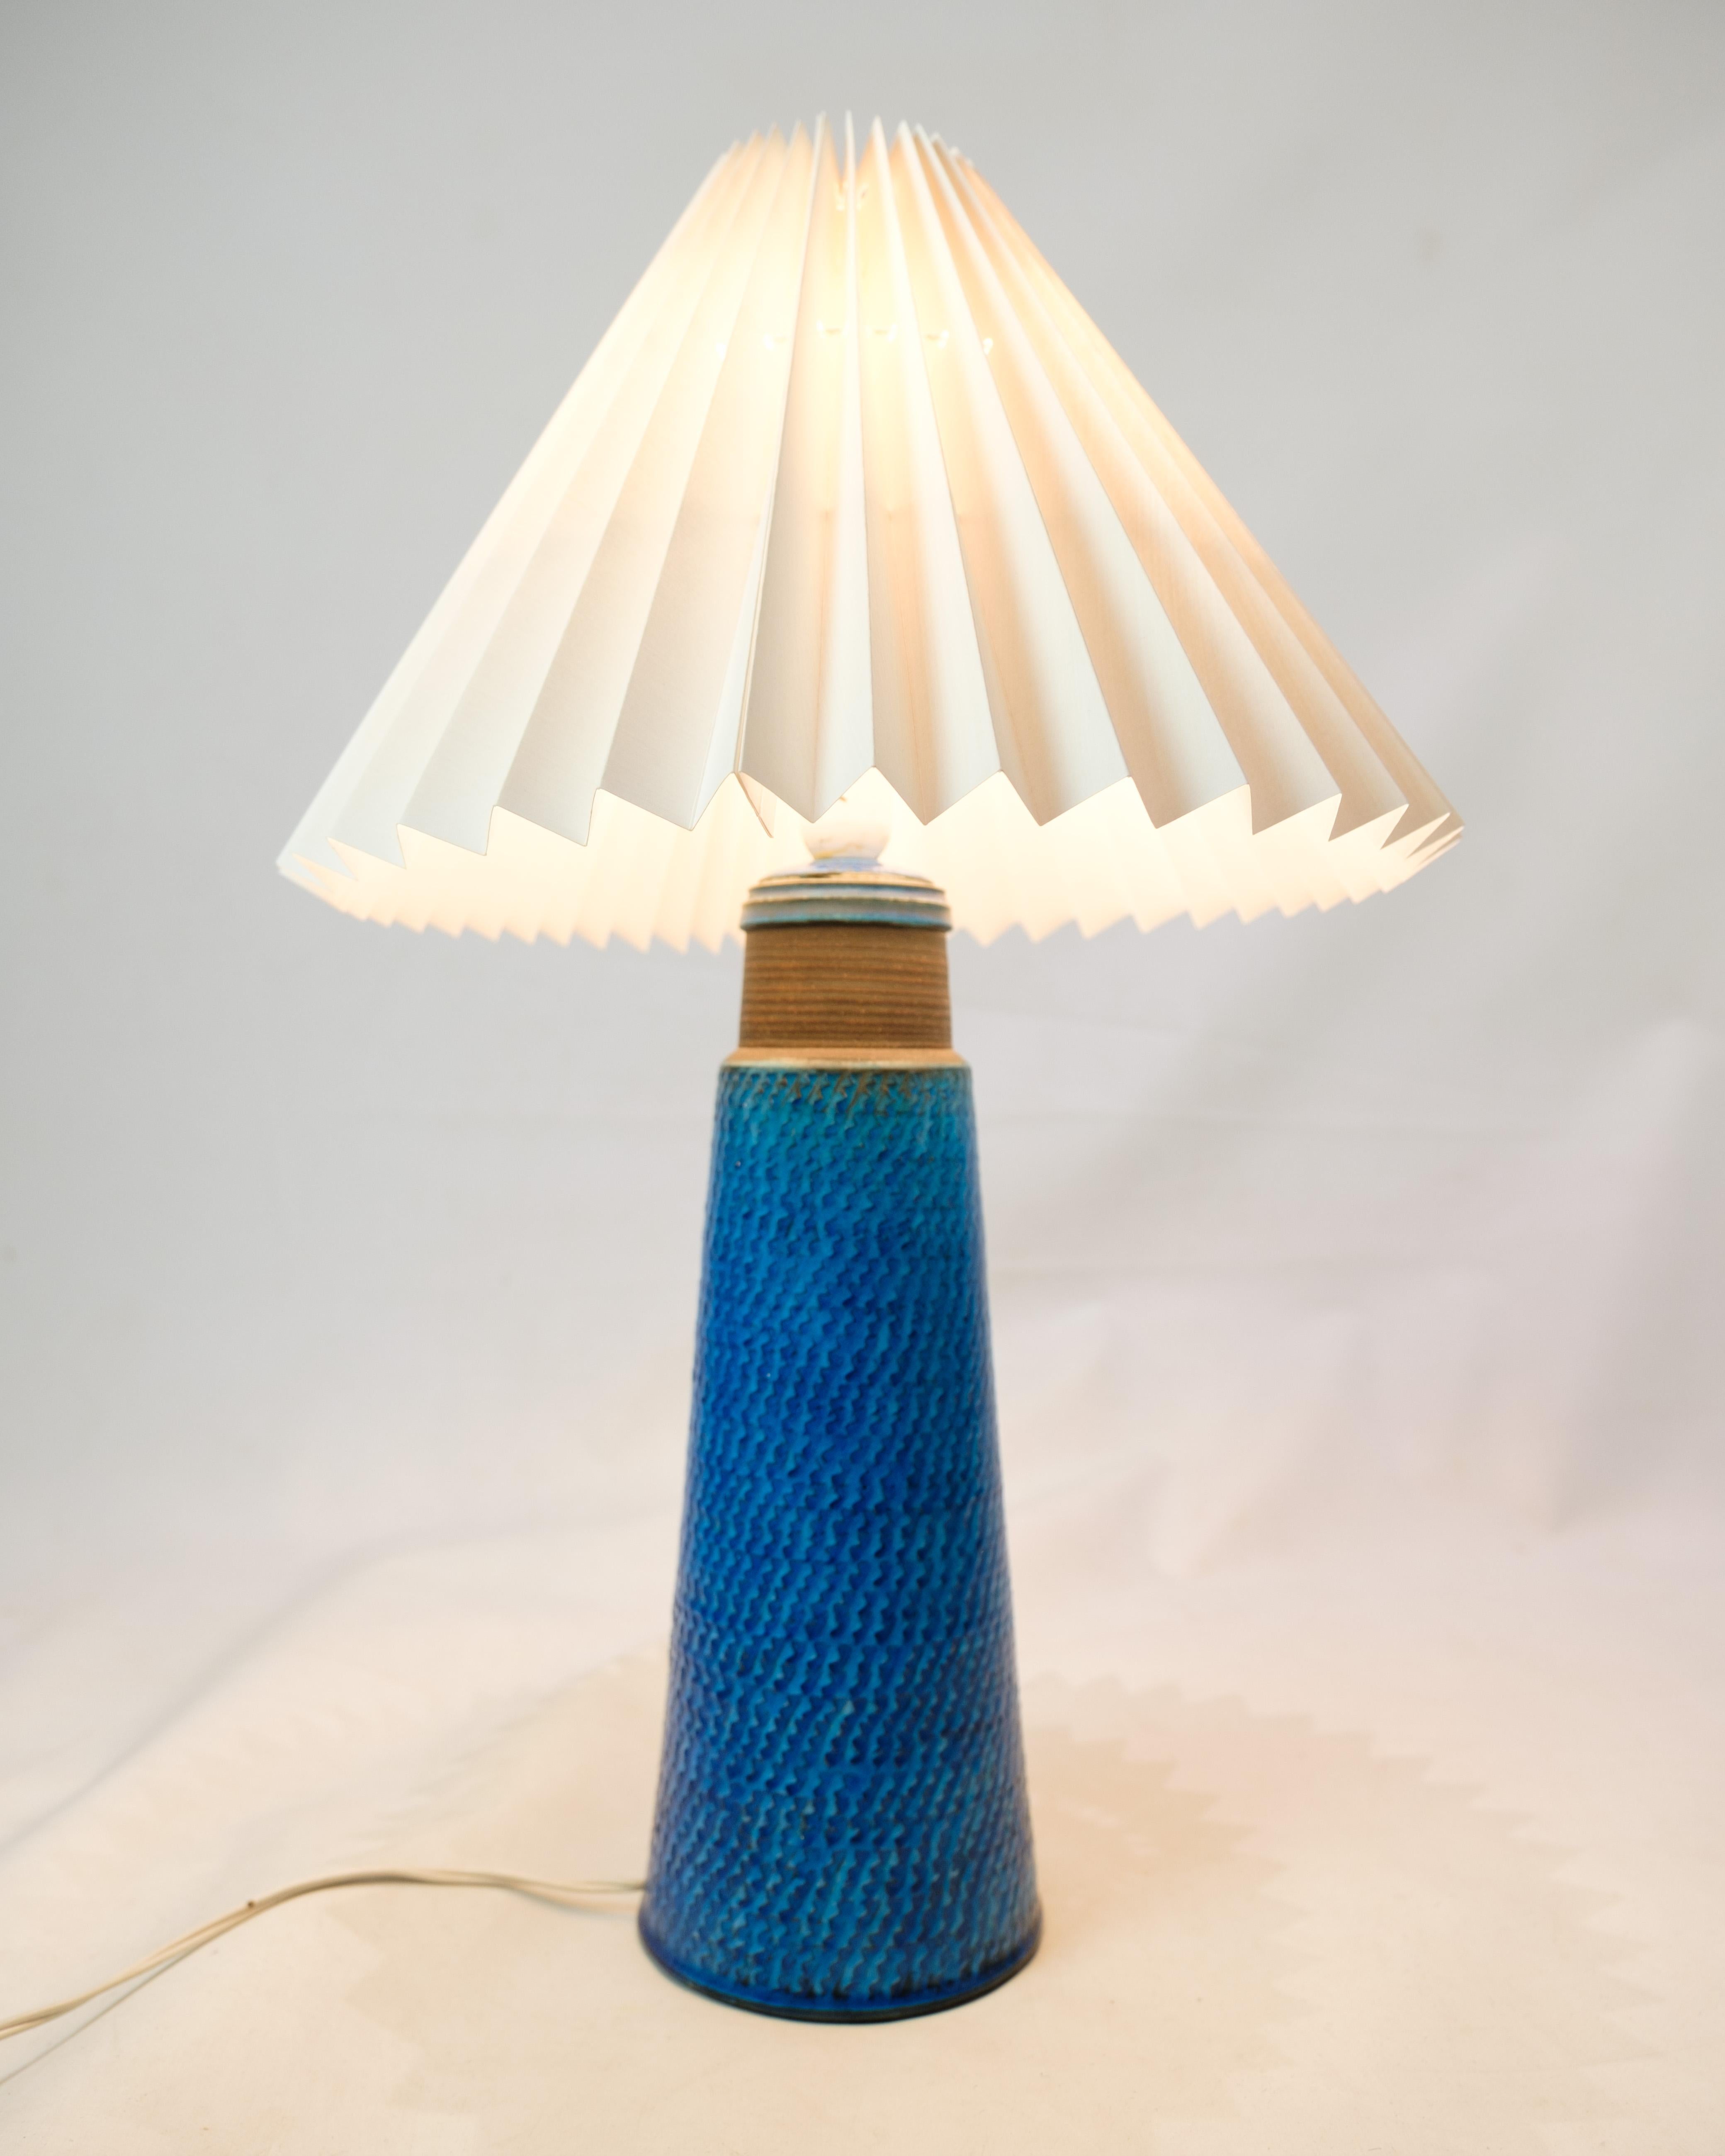 This set of two table lamps are unique examples of design beauty, created by Nils Kähler and produced by Herman A. Kähler. The lamp's blue color and herringbone pattern give an unmistakable and charming expression that creates a unique atmosphere in